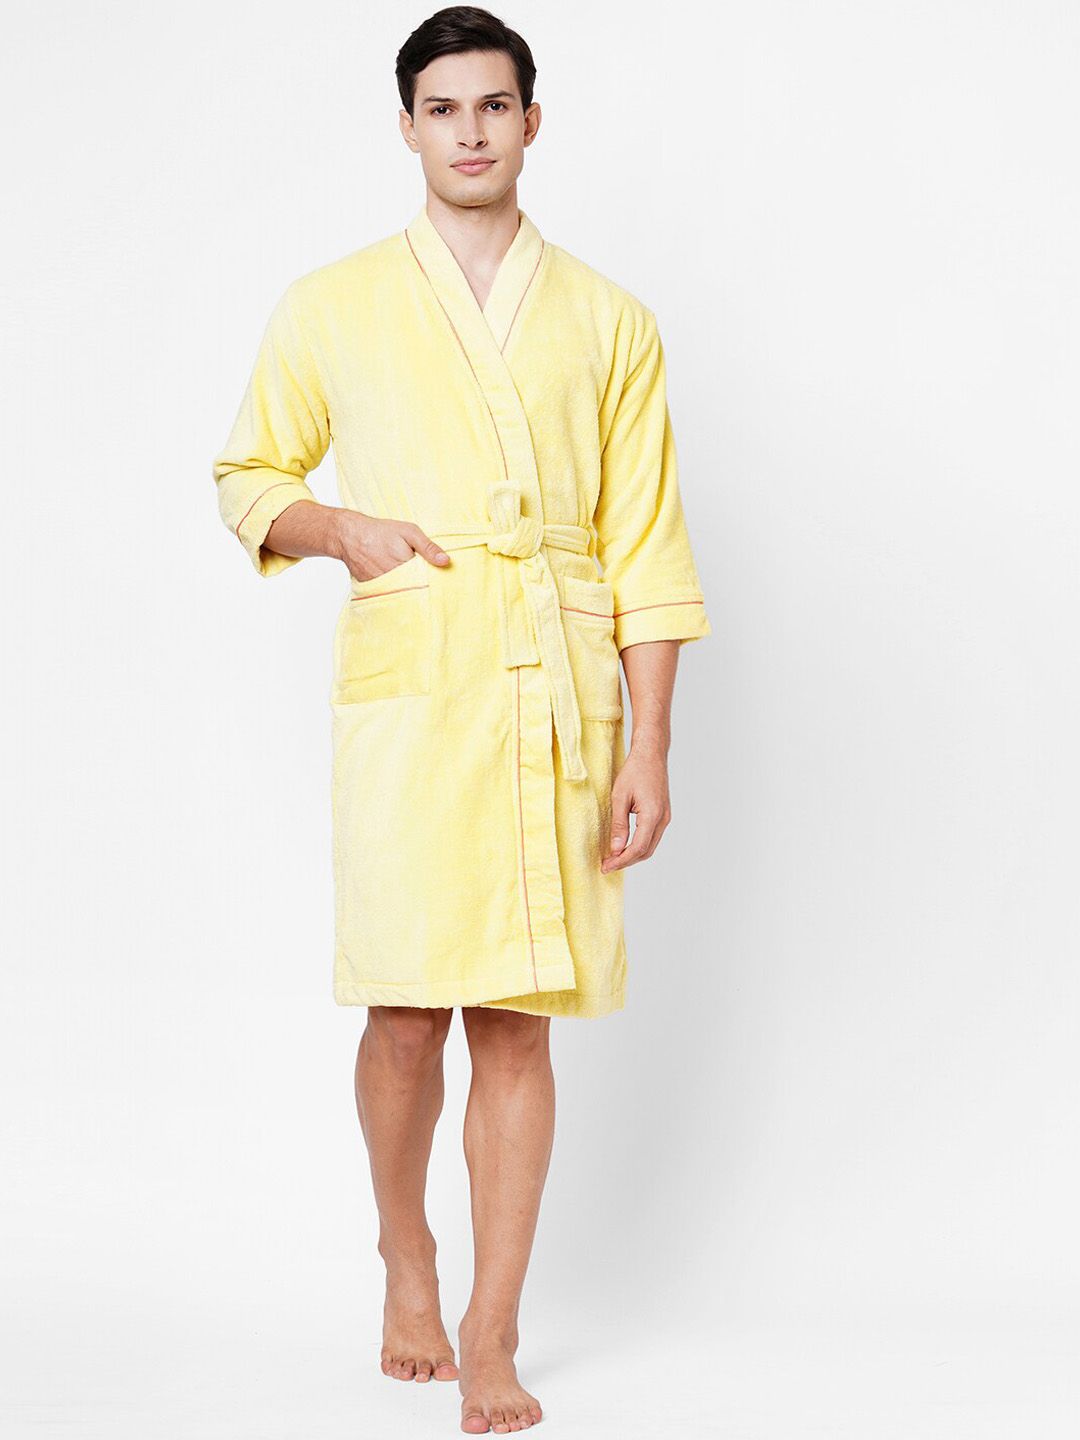 SPACES Coral Yellow Solid Pure Cotton 380 GSM Bath Robe Price in India